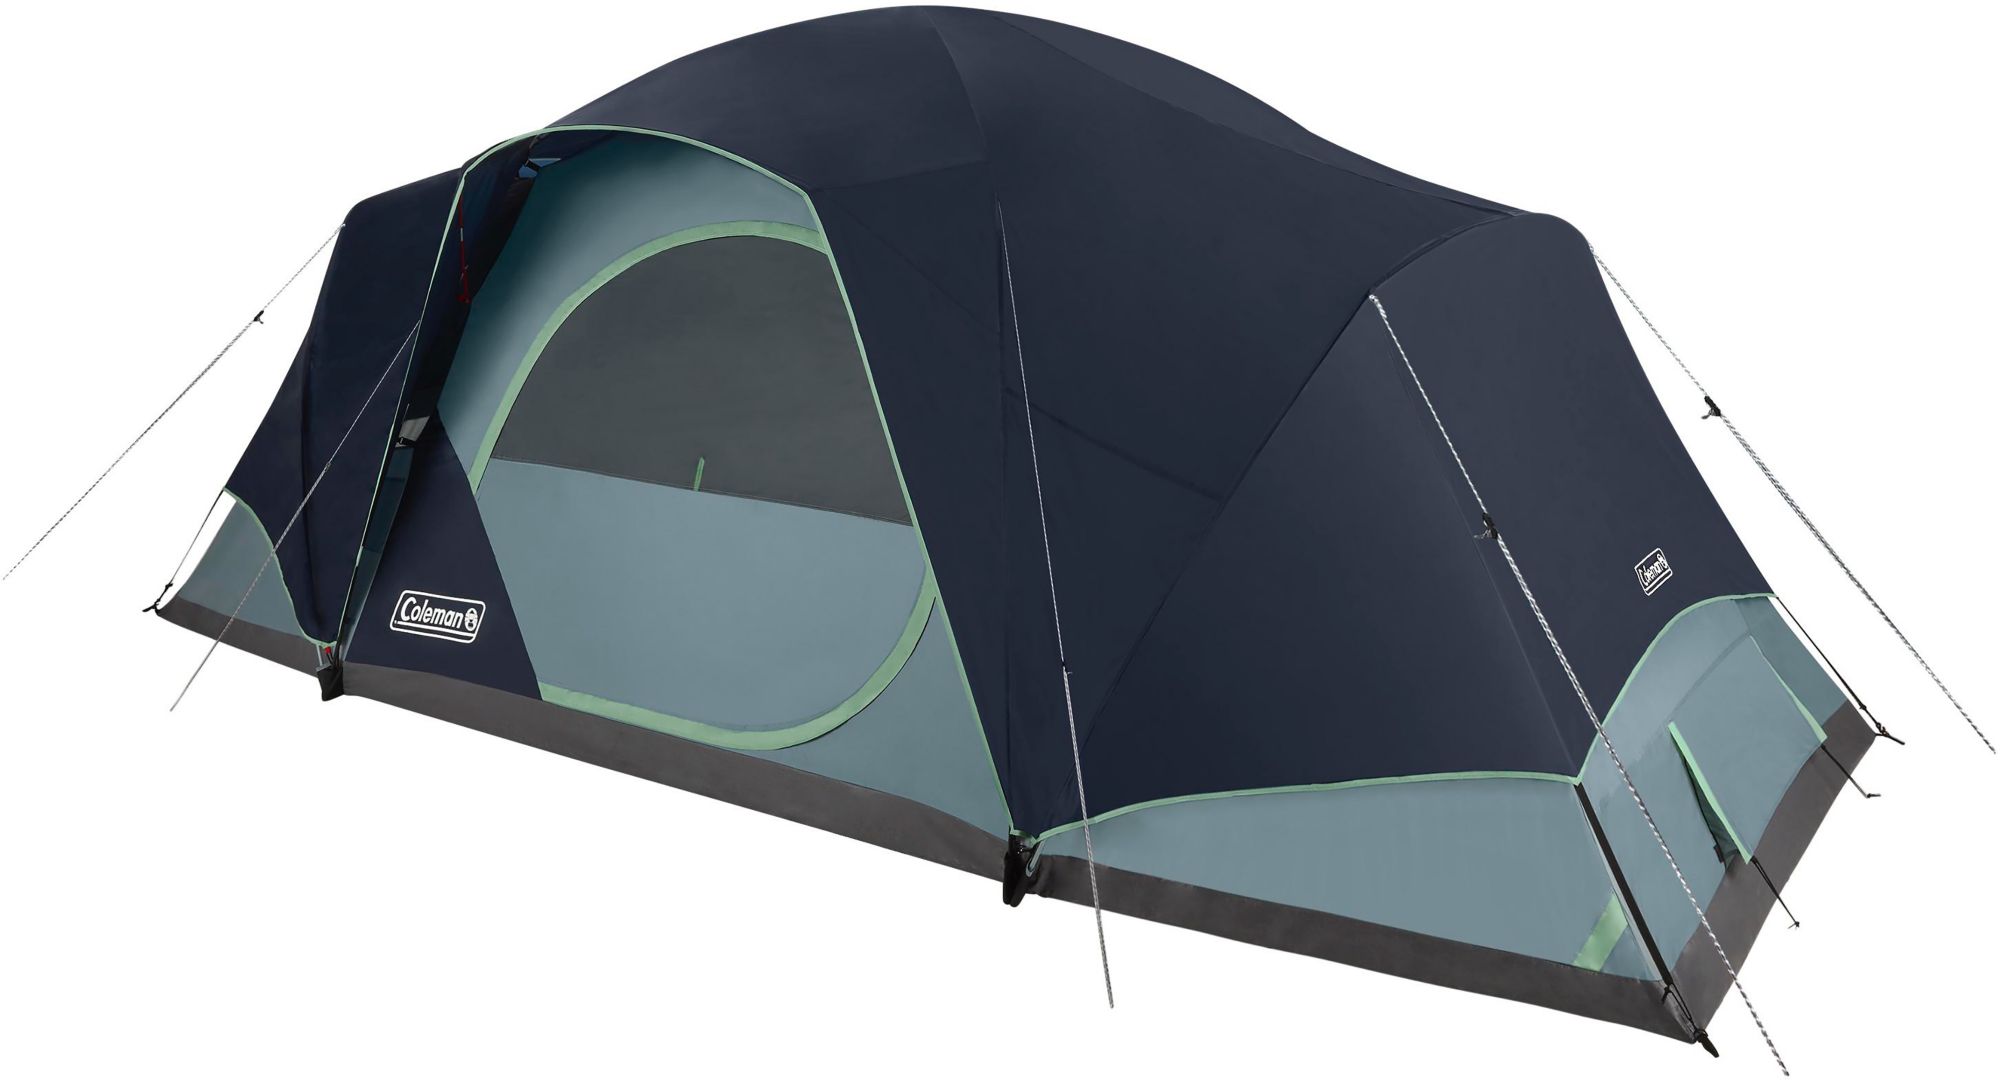 Photos - Tent Coleman Skydome 12-Person Camping  XL, Blue 21COLUSKYDMTNT12PCAT 